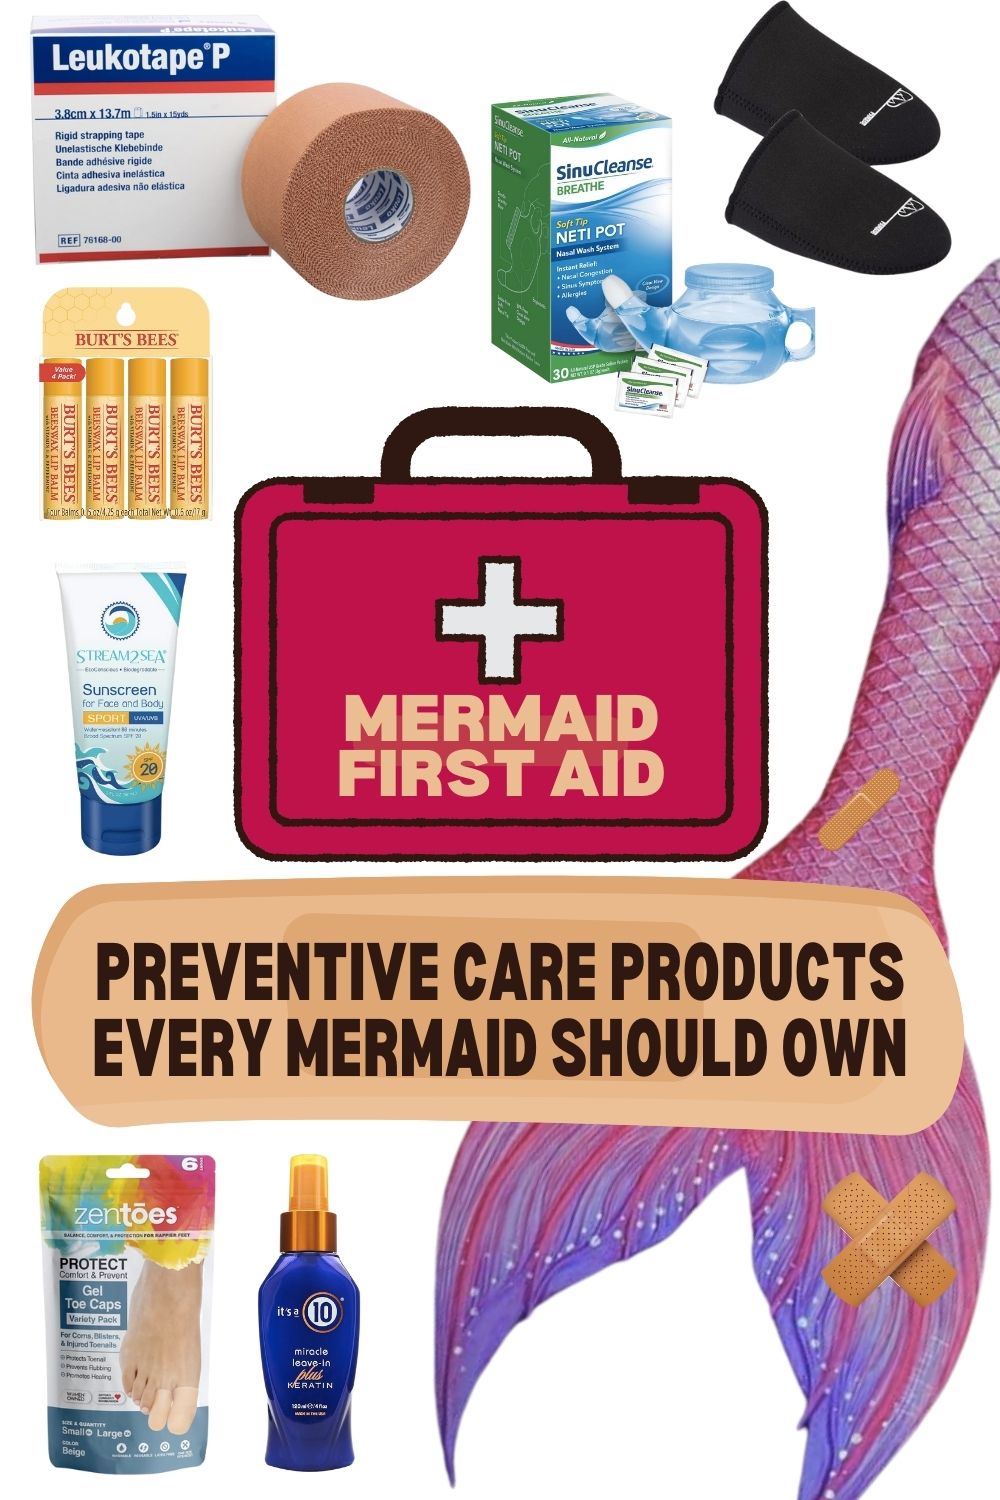 Mermaid First Aid: Preventive Care products every Mermaid should own